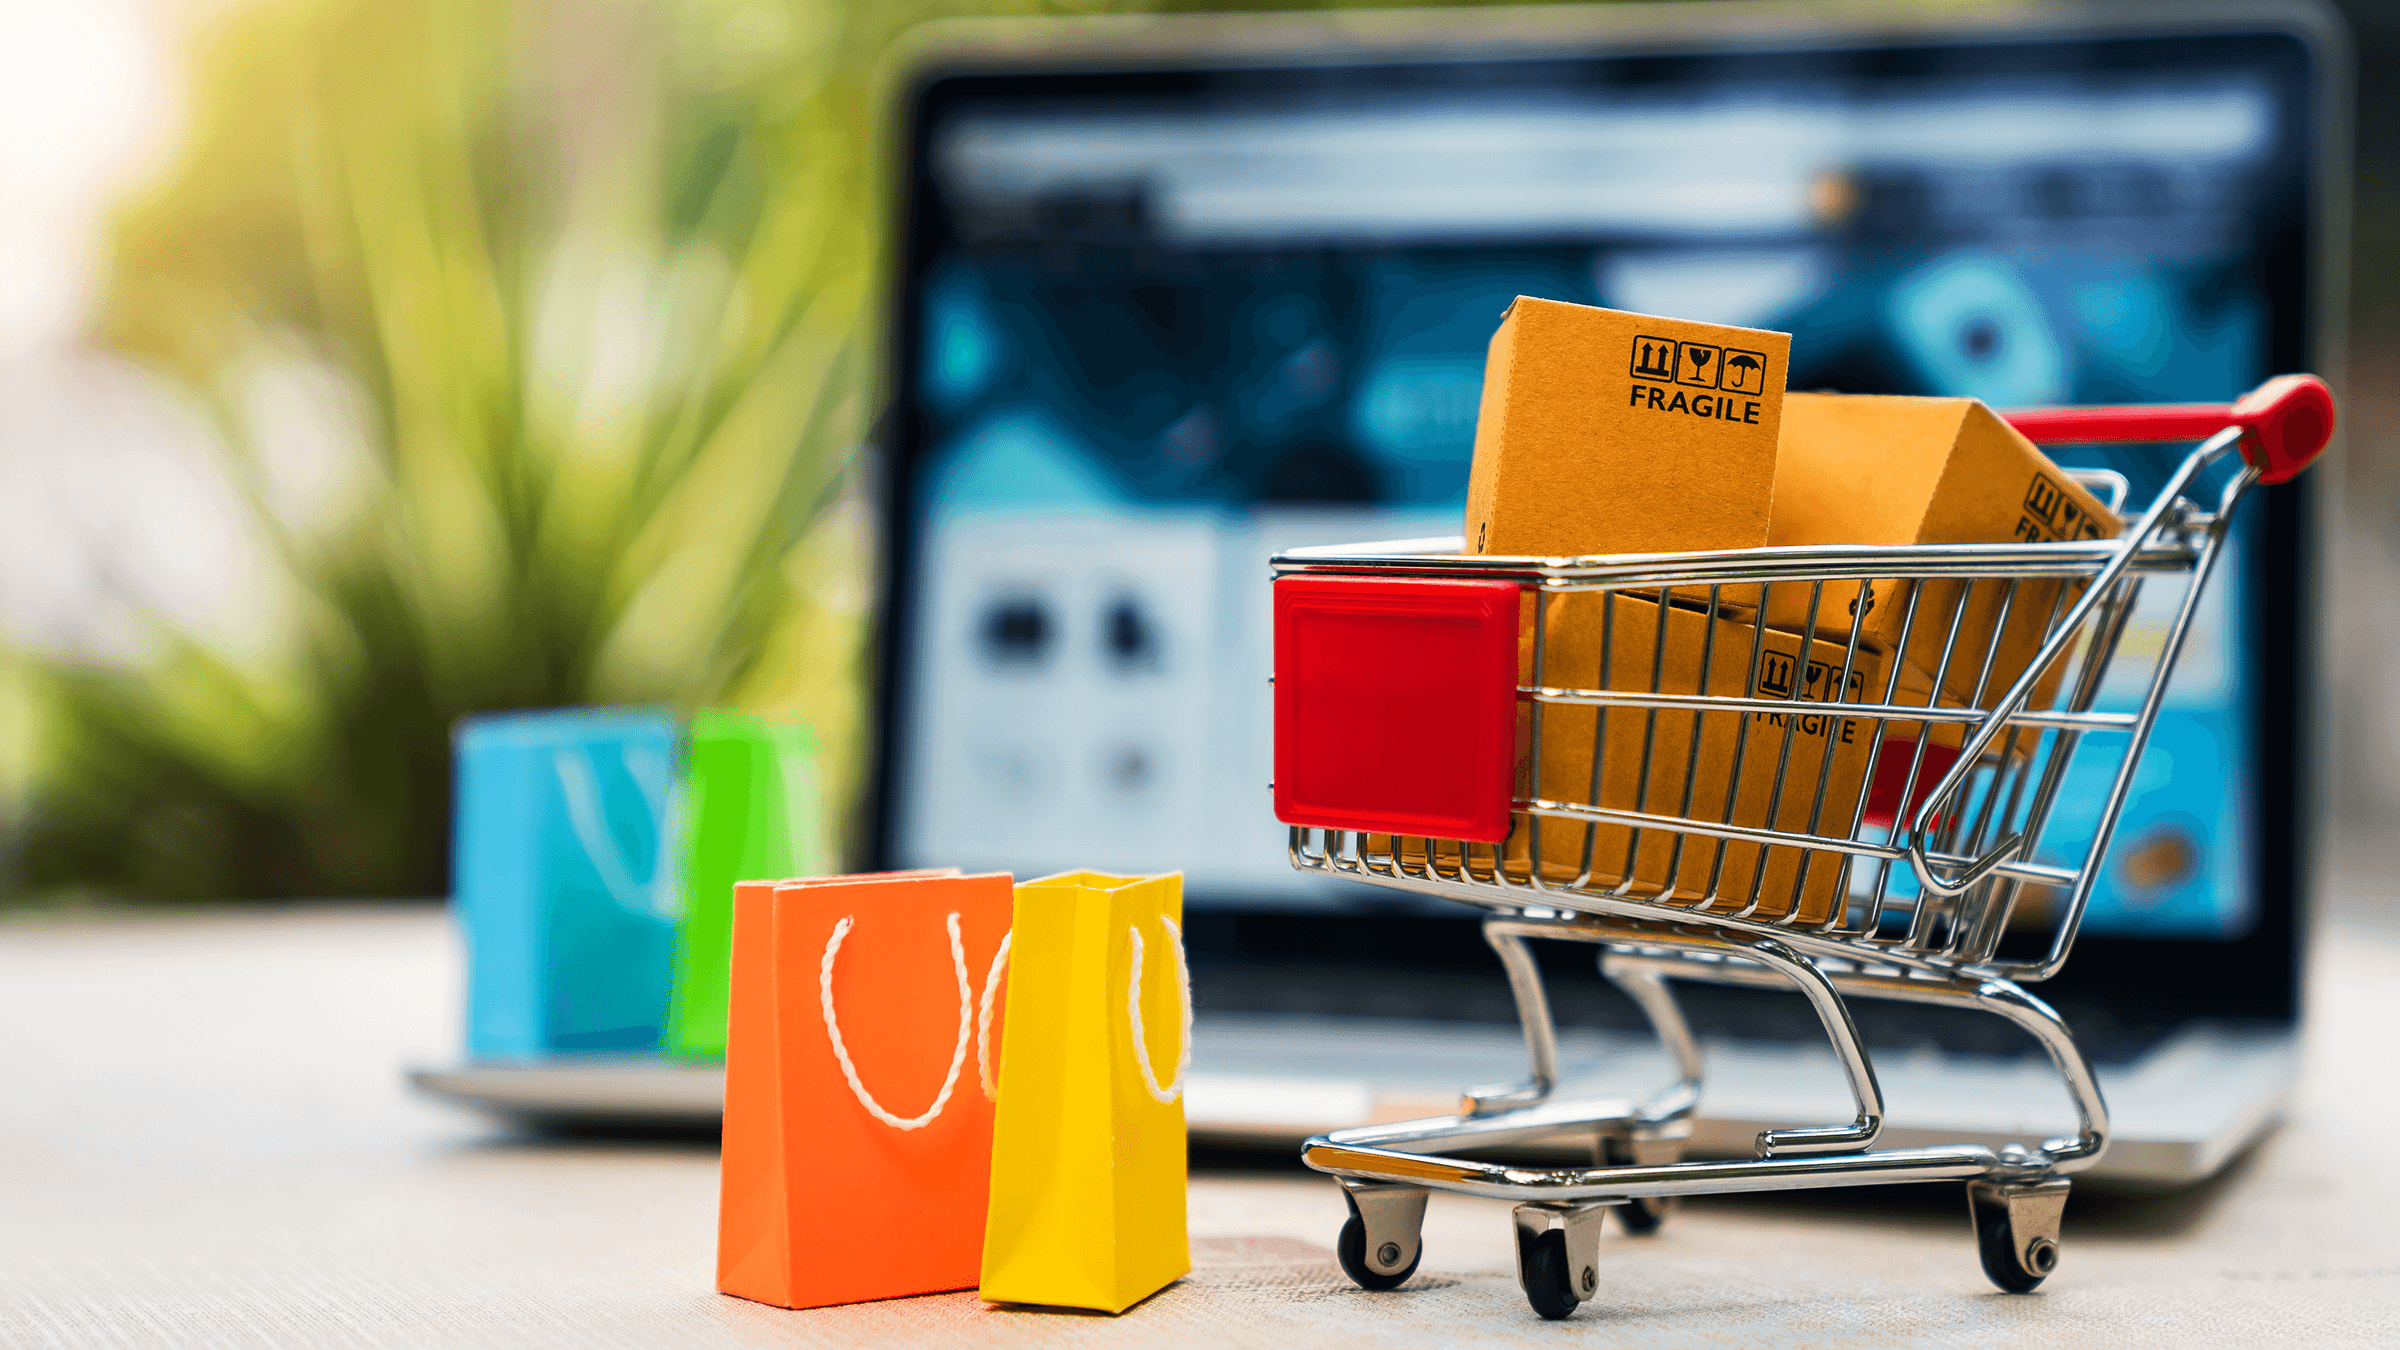 How bespoke e-commerce can future-proof brands for a decade in flux